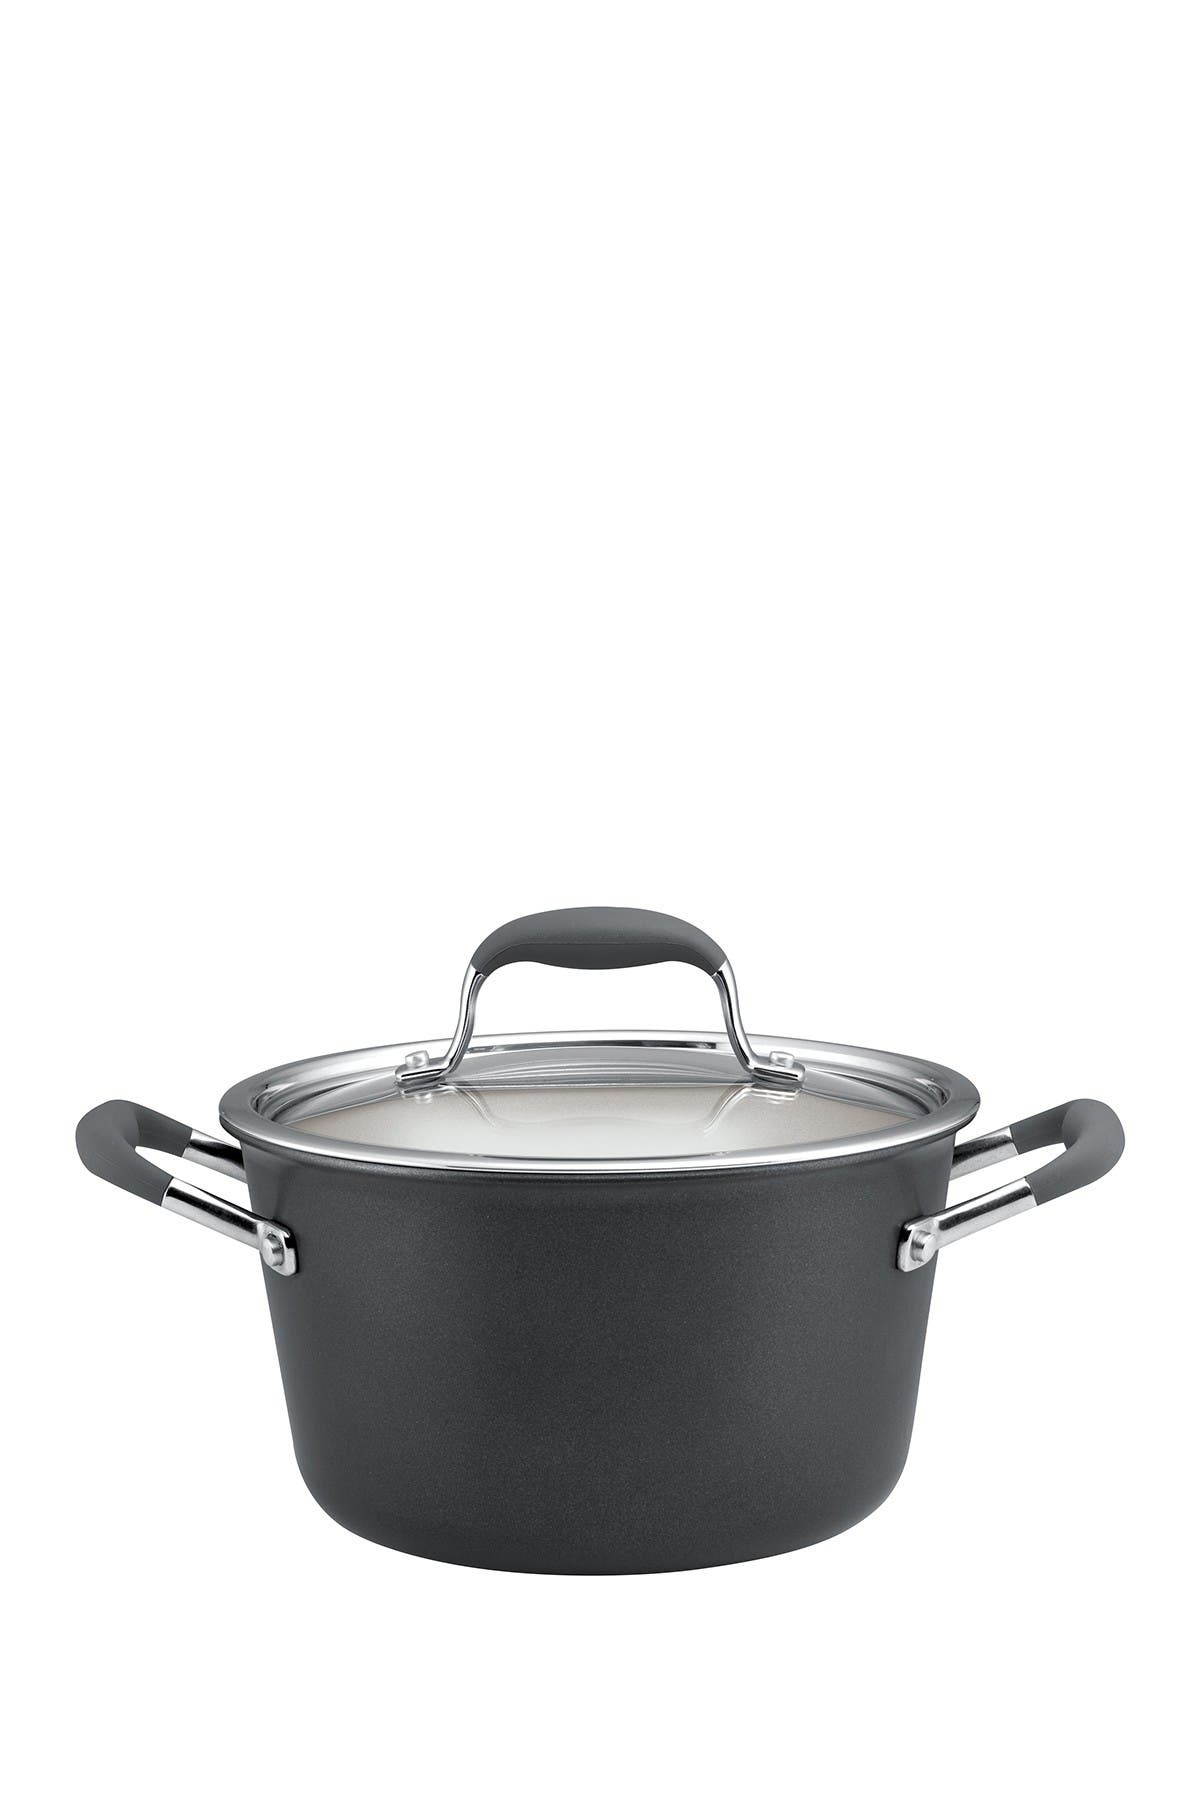 Anolon Advanced Pewter Hard Anodized 4.5-quart Covered Tapered Saucepot In Grey